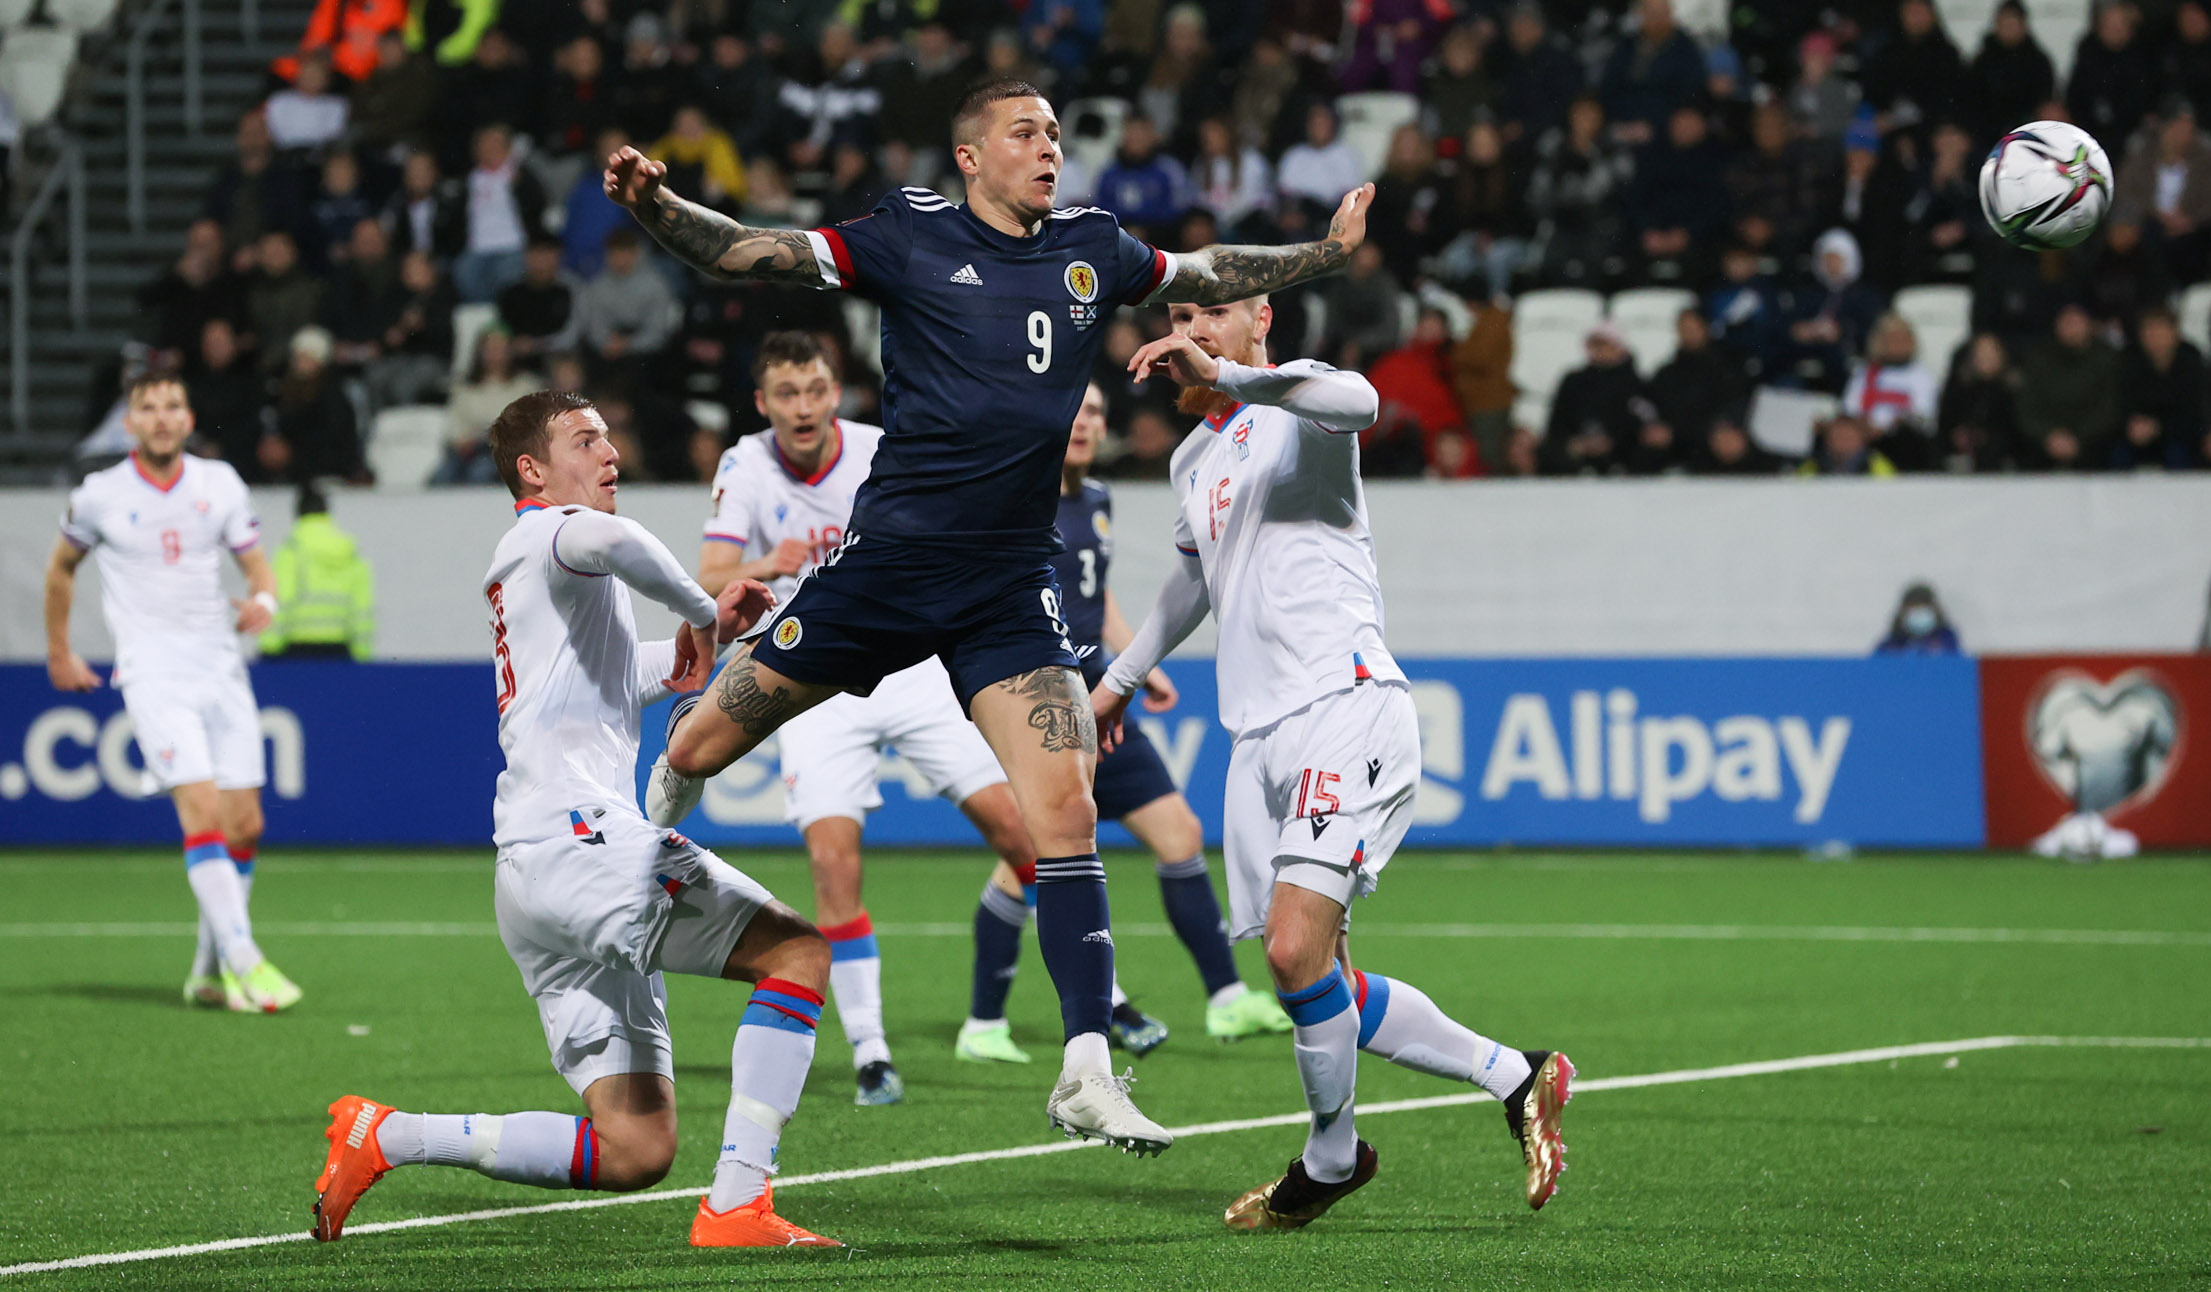 <strong>Just when a play-off place looked like it was on a plate for Scotland, they huffed and puffed for 87 minutes in the Faroe Islands until a cross brushed off Lyndon Dykes and into the net. Not pretty, but we were happy to take it.</strong>”/><cite class=cite>SNS Group</cite></div><figcaption aria-hidden=true><strong>Just when a play-off place looked like it was on a plate for Scotland, they huffed and puffed for 87 minutes in the Faroe Islands until a cross brushed off Lyndon Dykes and into the net. Not pretty, but we were happy to take it.</strong> <cite class=hidden>SNS Group</cite></figcaption></figure><h2 class=